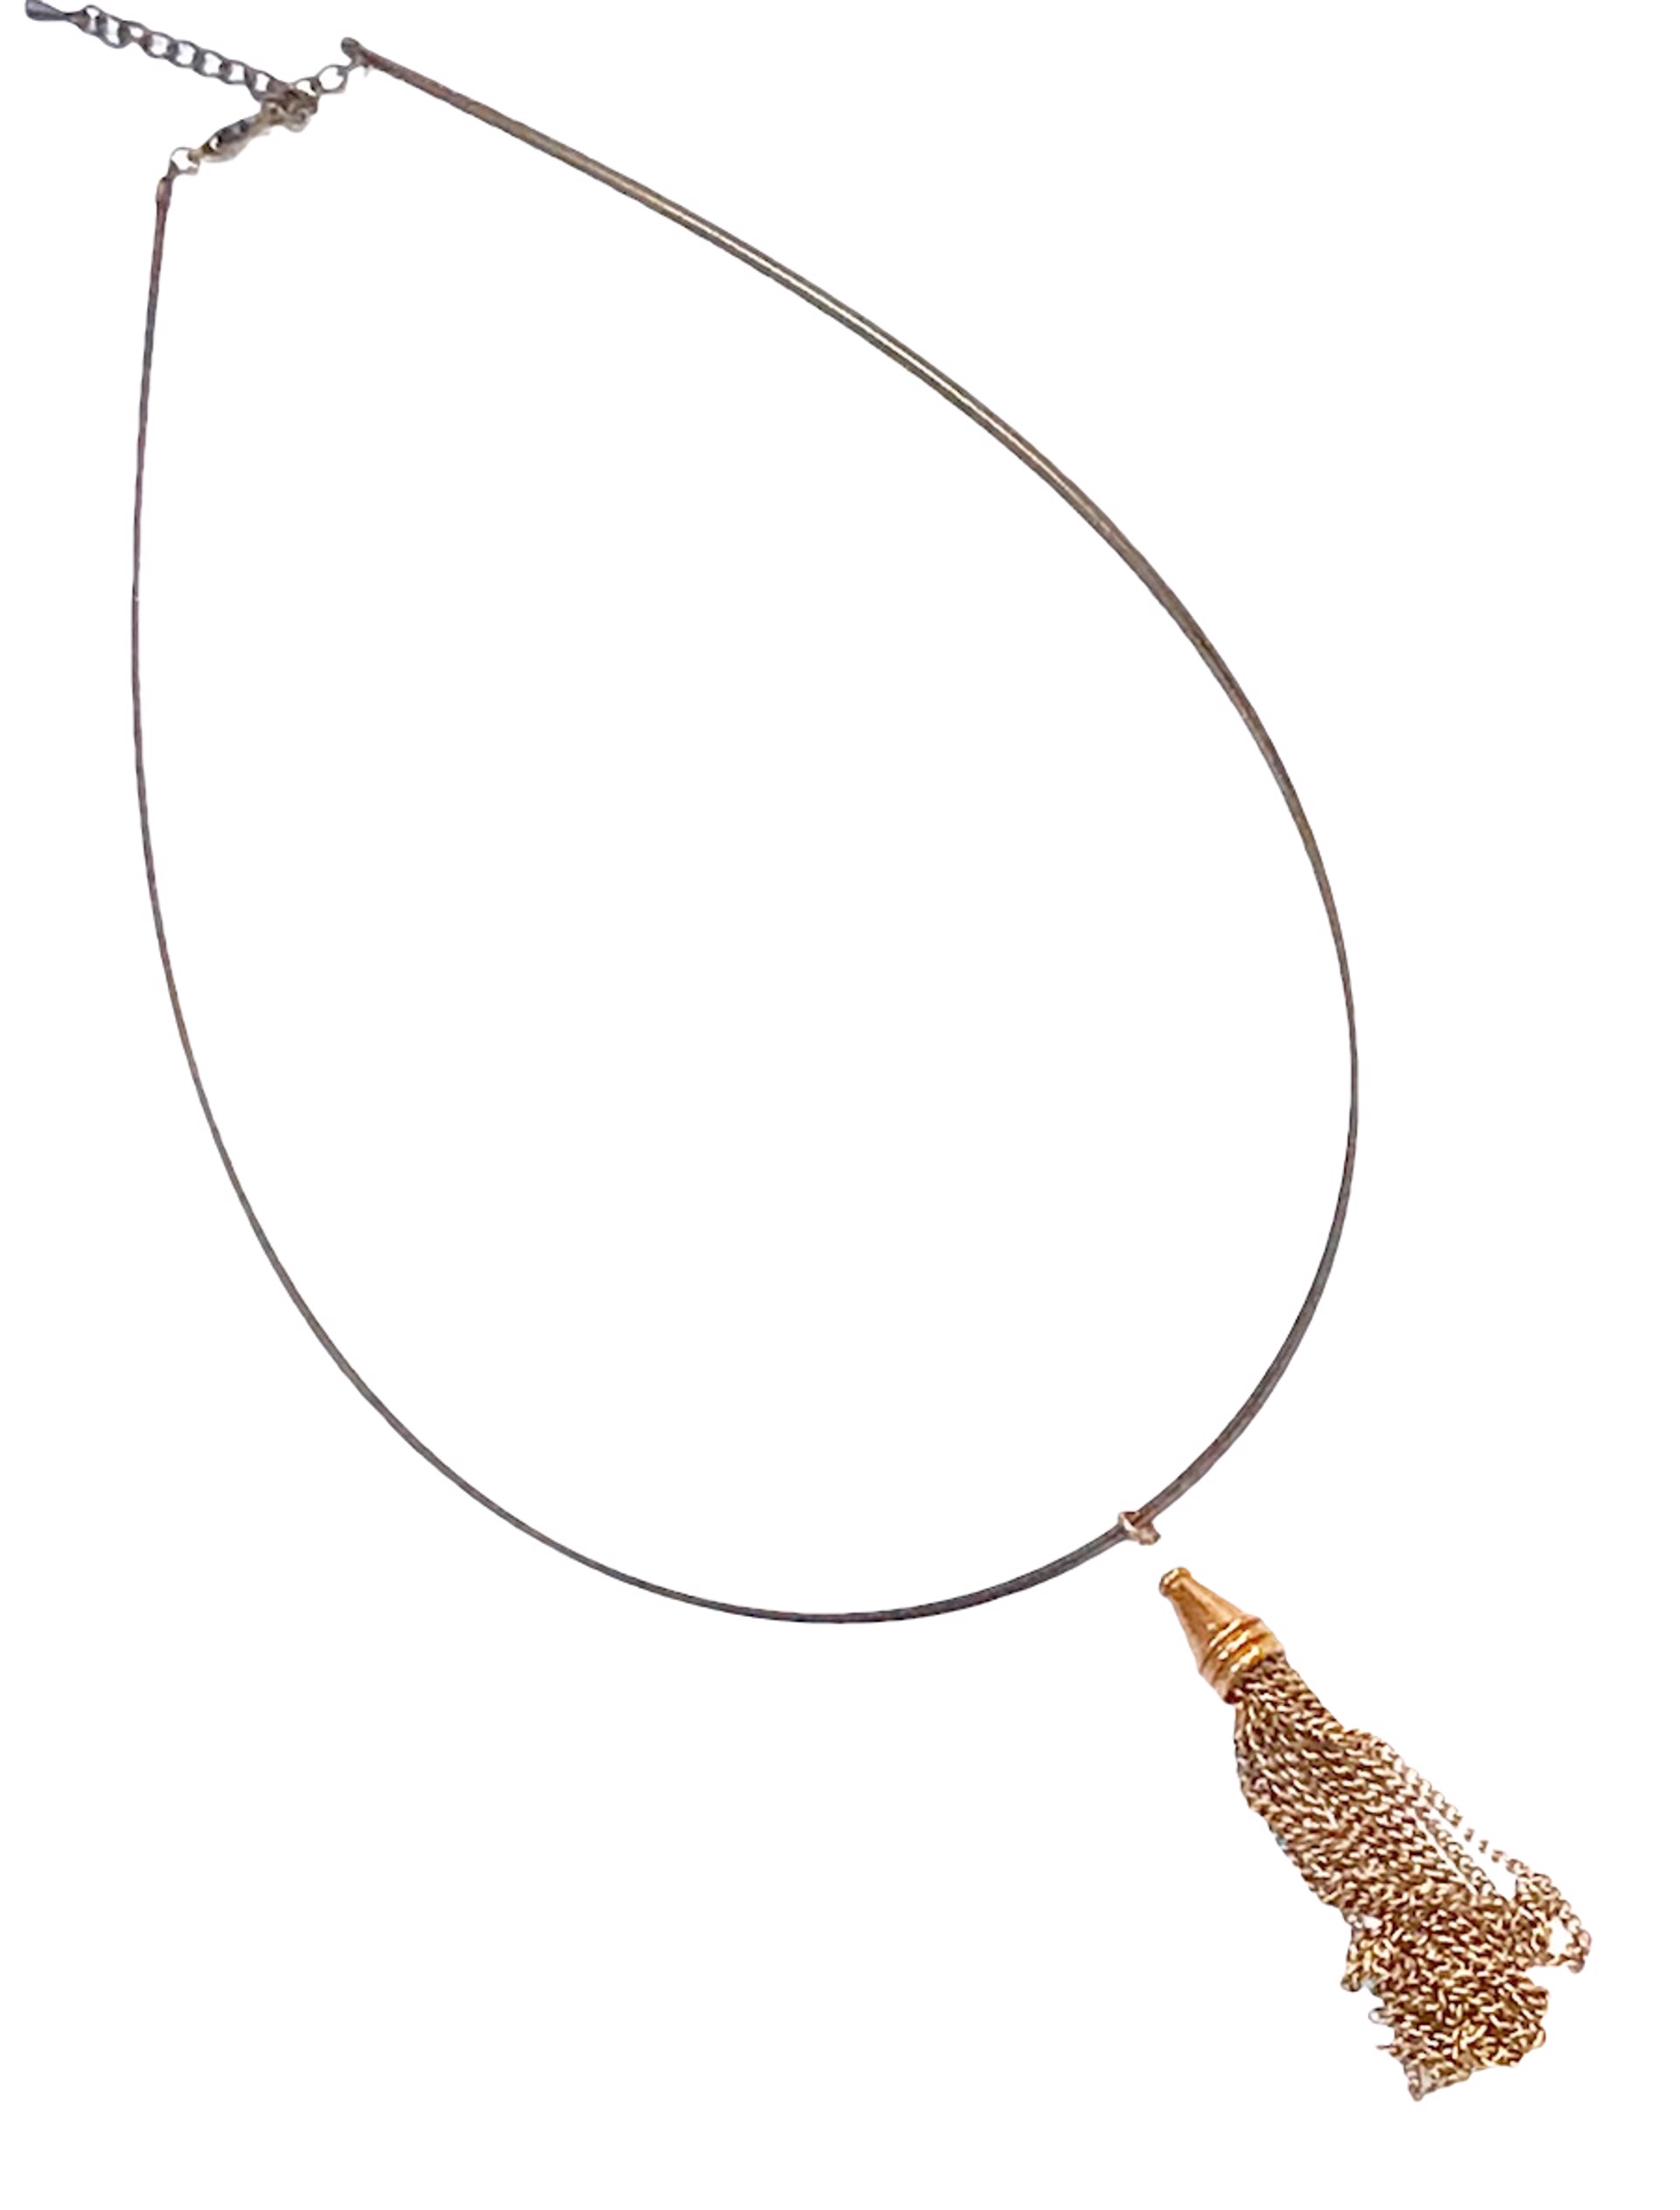 Necklace - Copper Wire With Tassel  by Indigo Desert Ranch - Jewelry